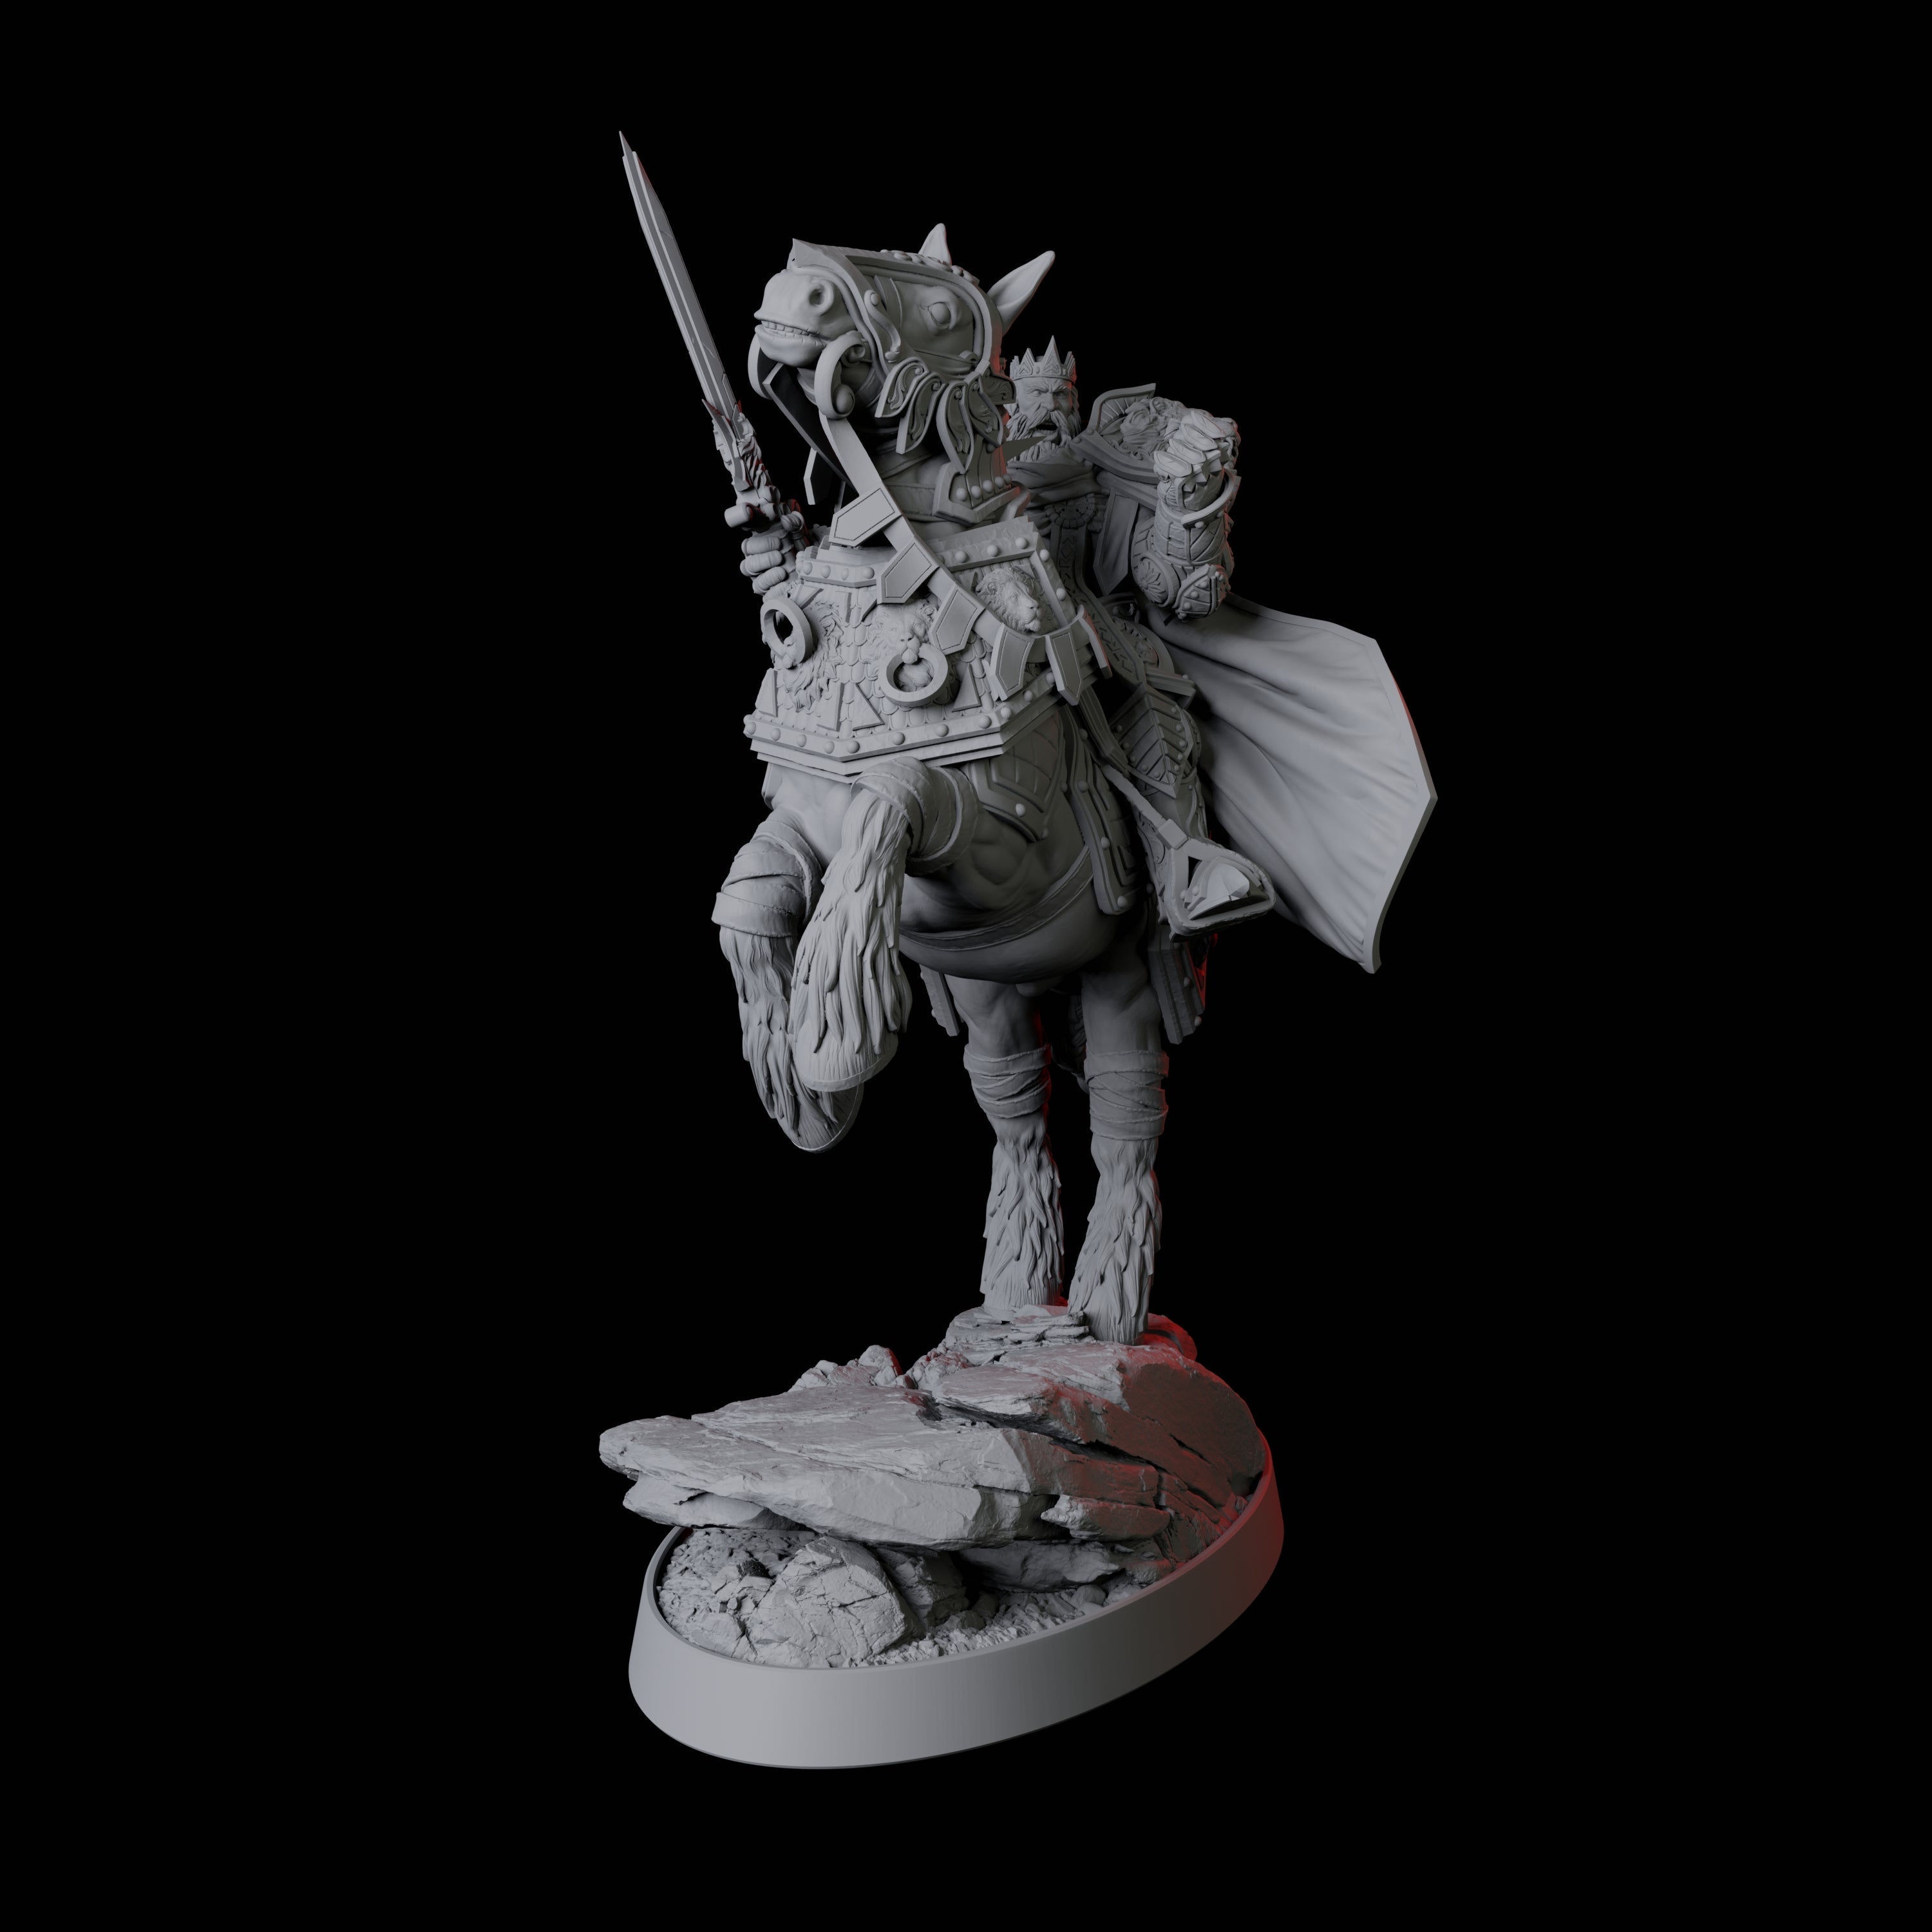 Paladin Knight on Rearing Horse Miniature for Dungeons and Dragons